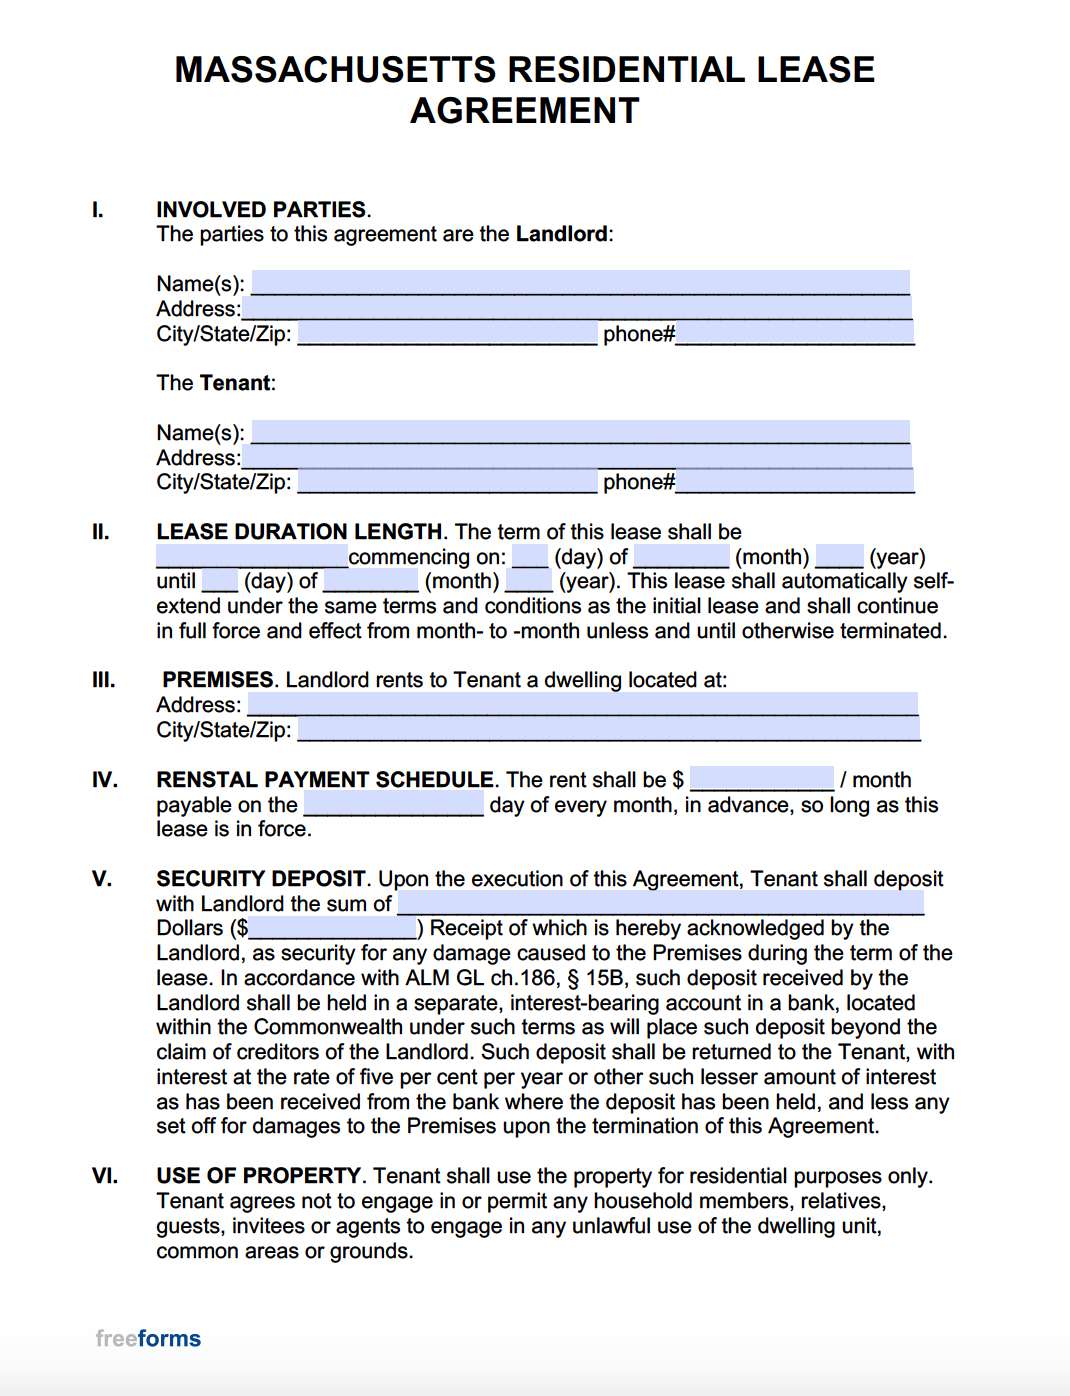 assured shorthold tenancy agreement template free download